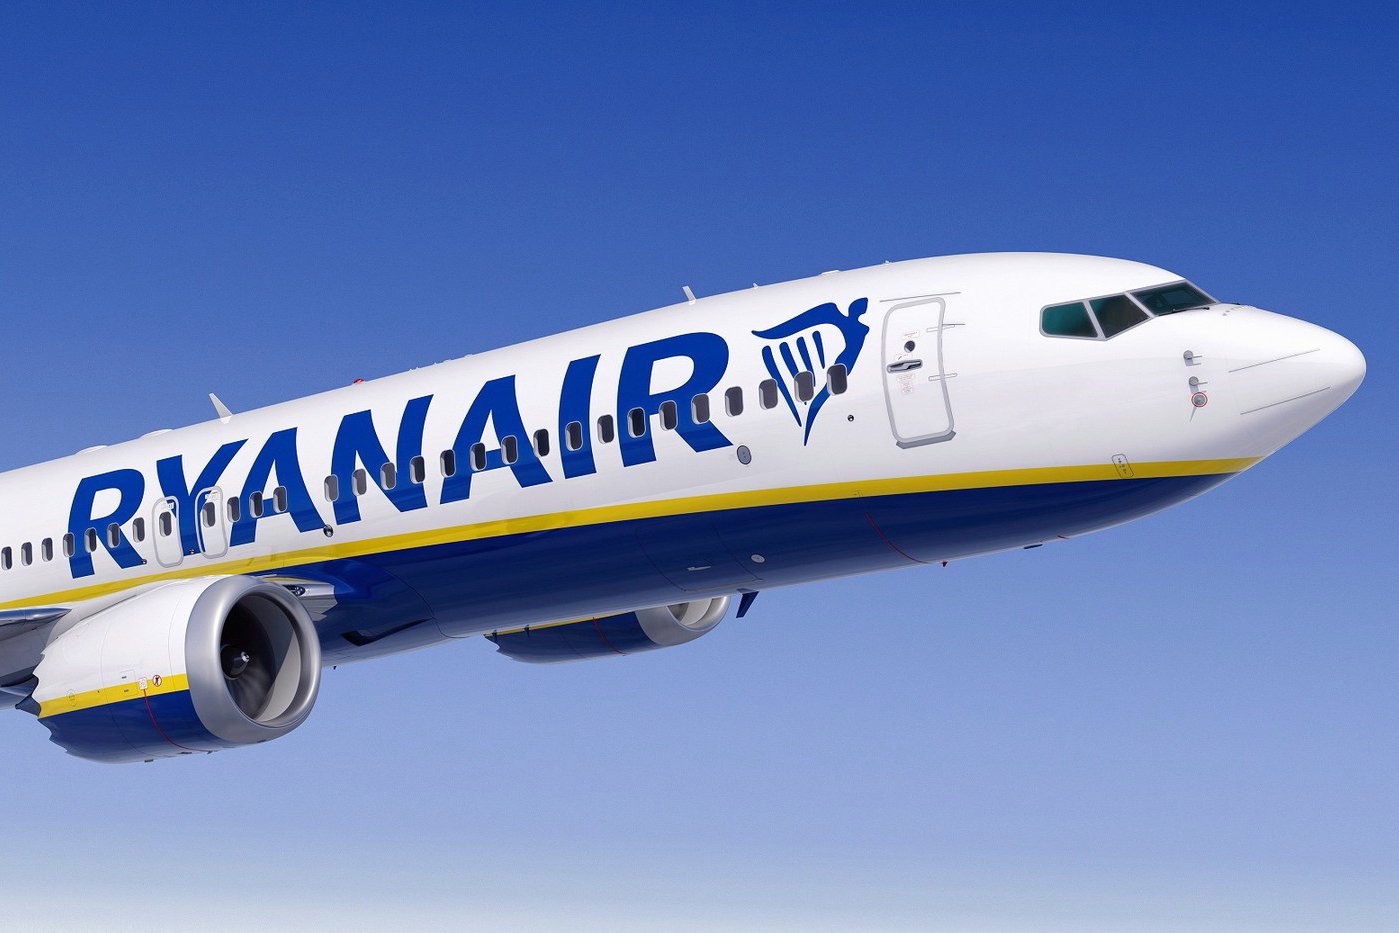 Ryanair has signed a purchase agreement for 75 additional Boeing 737 MAX airplanes, increasing its order book to 210 jets. Click to enlarge.